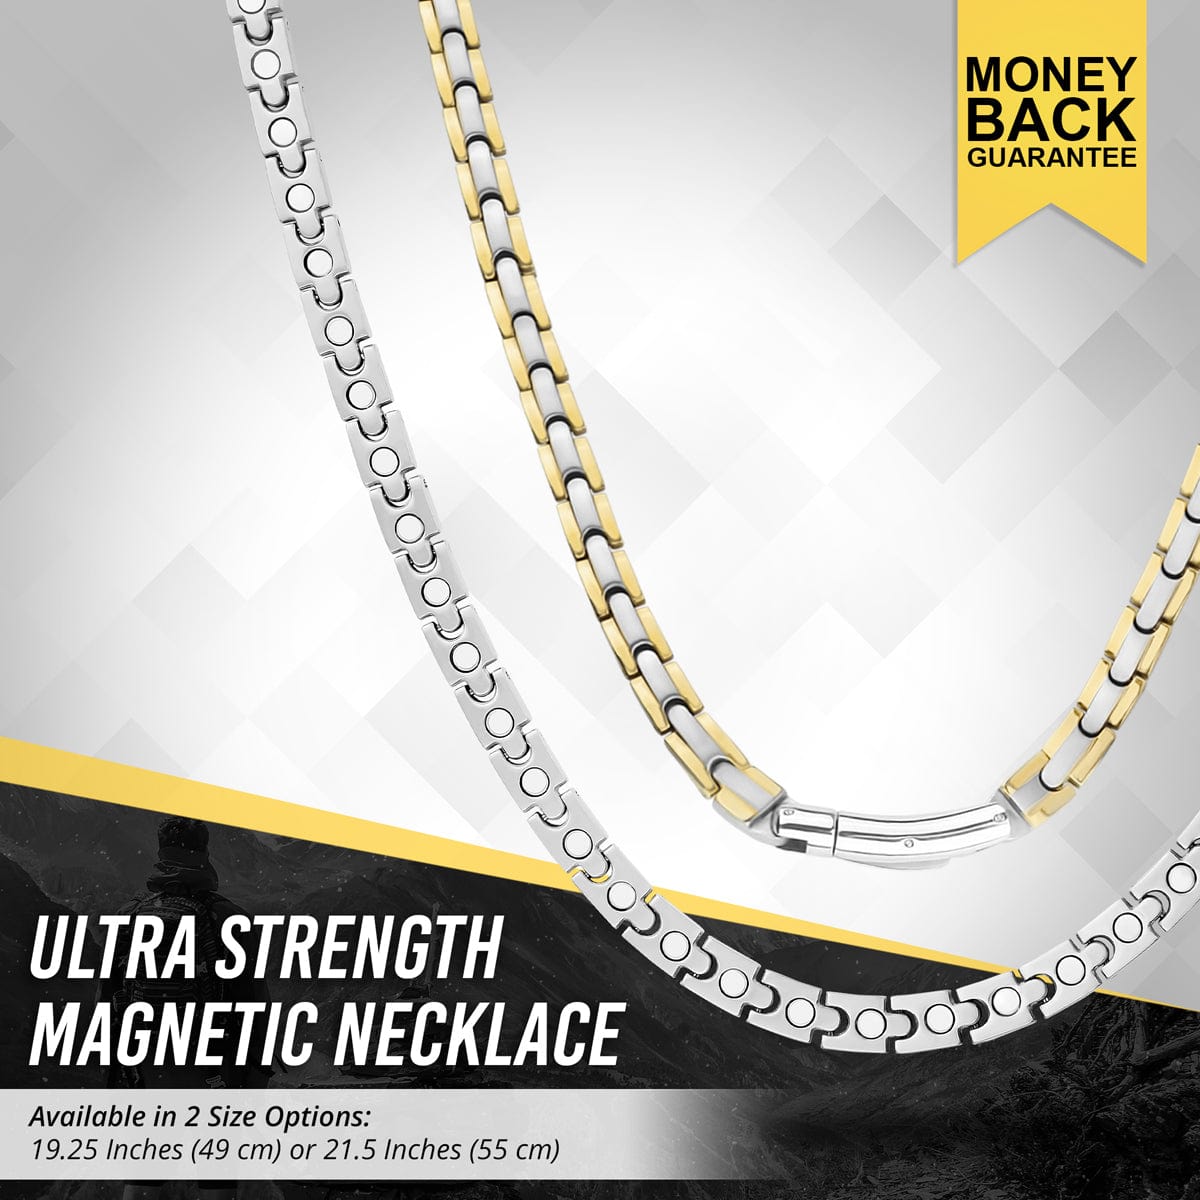 MagnetRX Magnetic Necklace for Men - Effective Mens Magnetic Necklaces - Stainless Steel Silver Curb Chain Necklace with Magnets